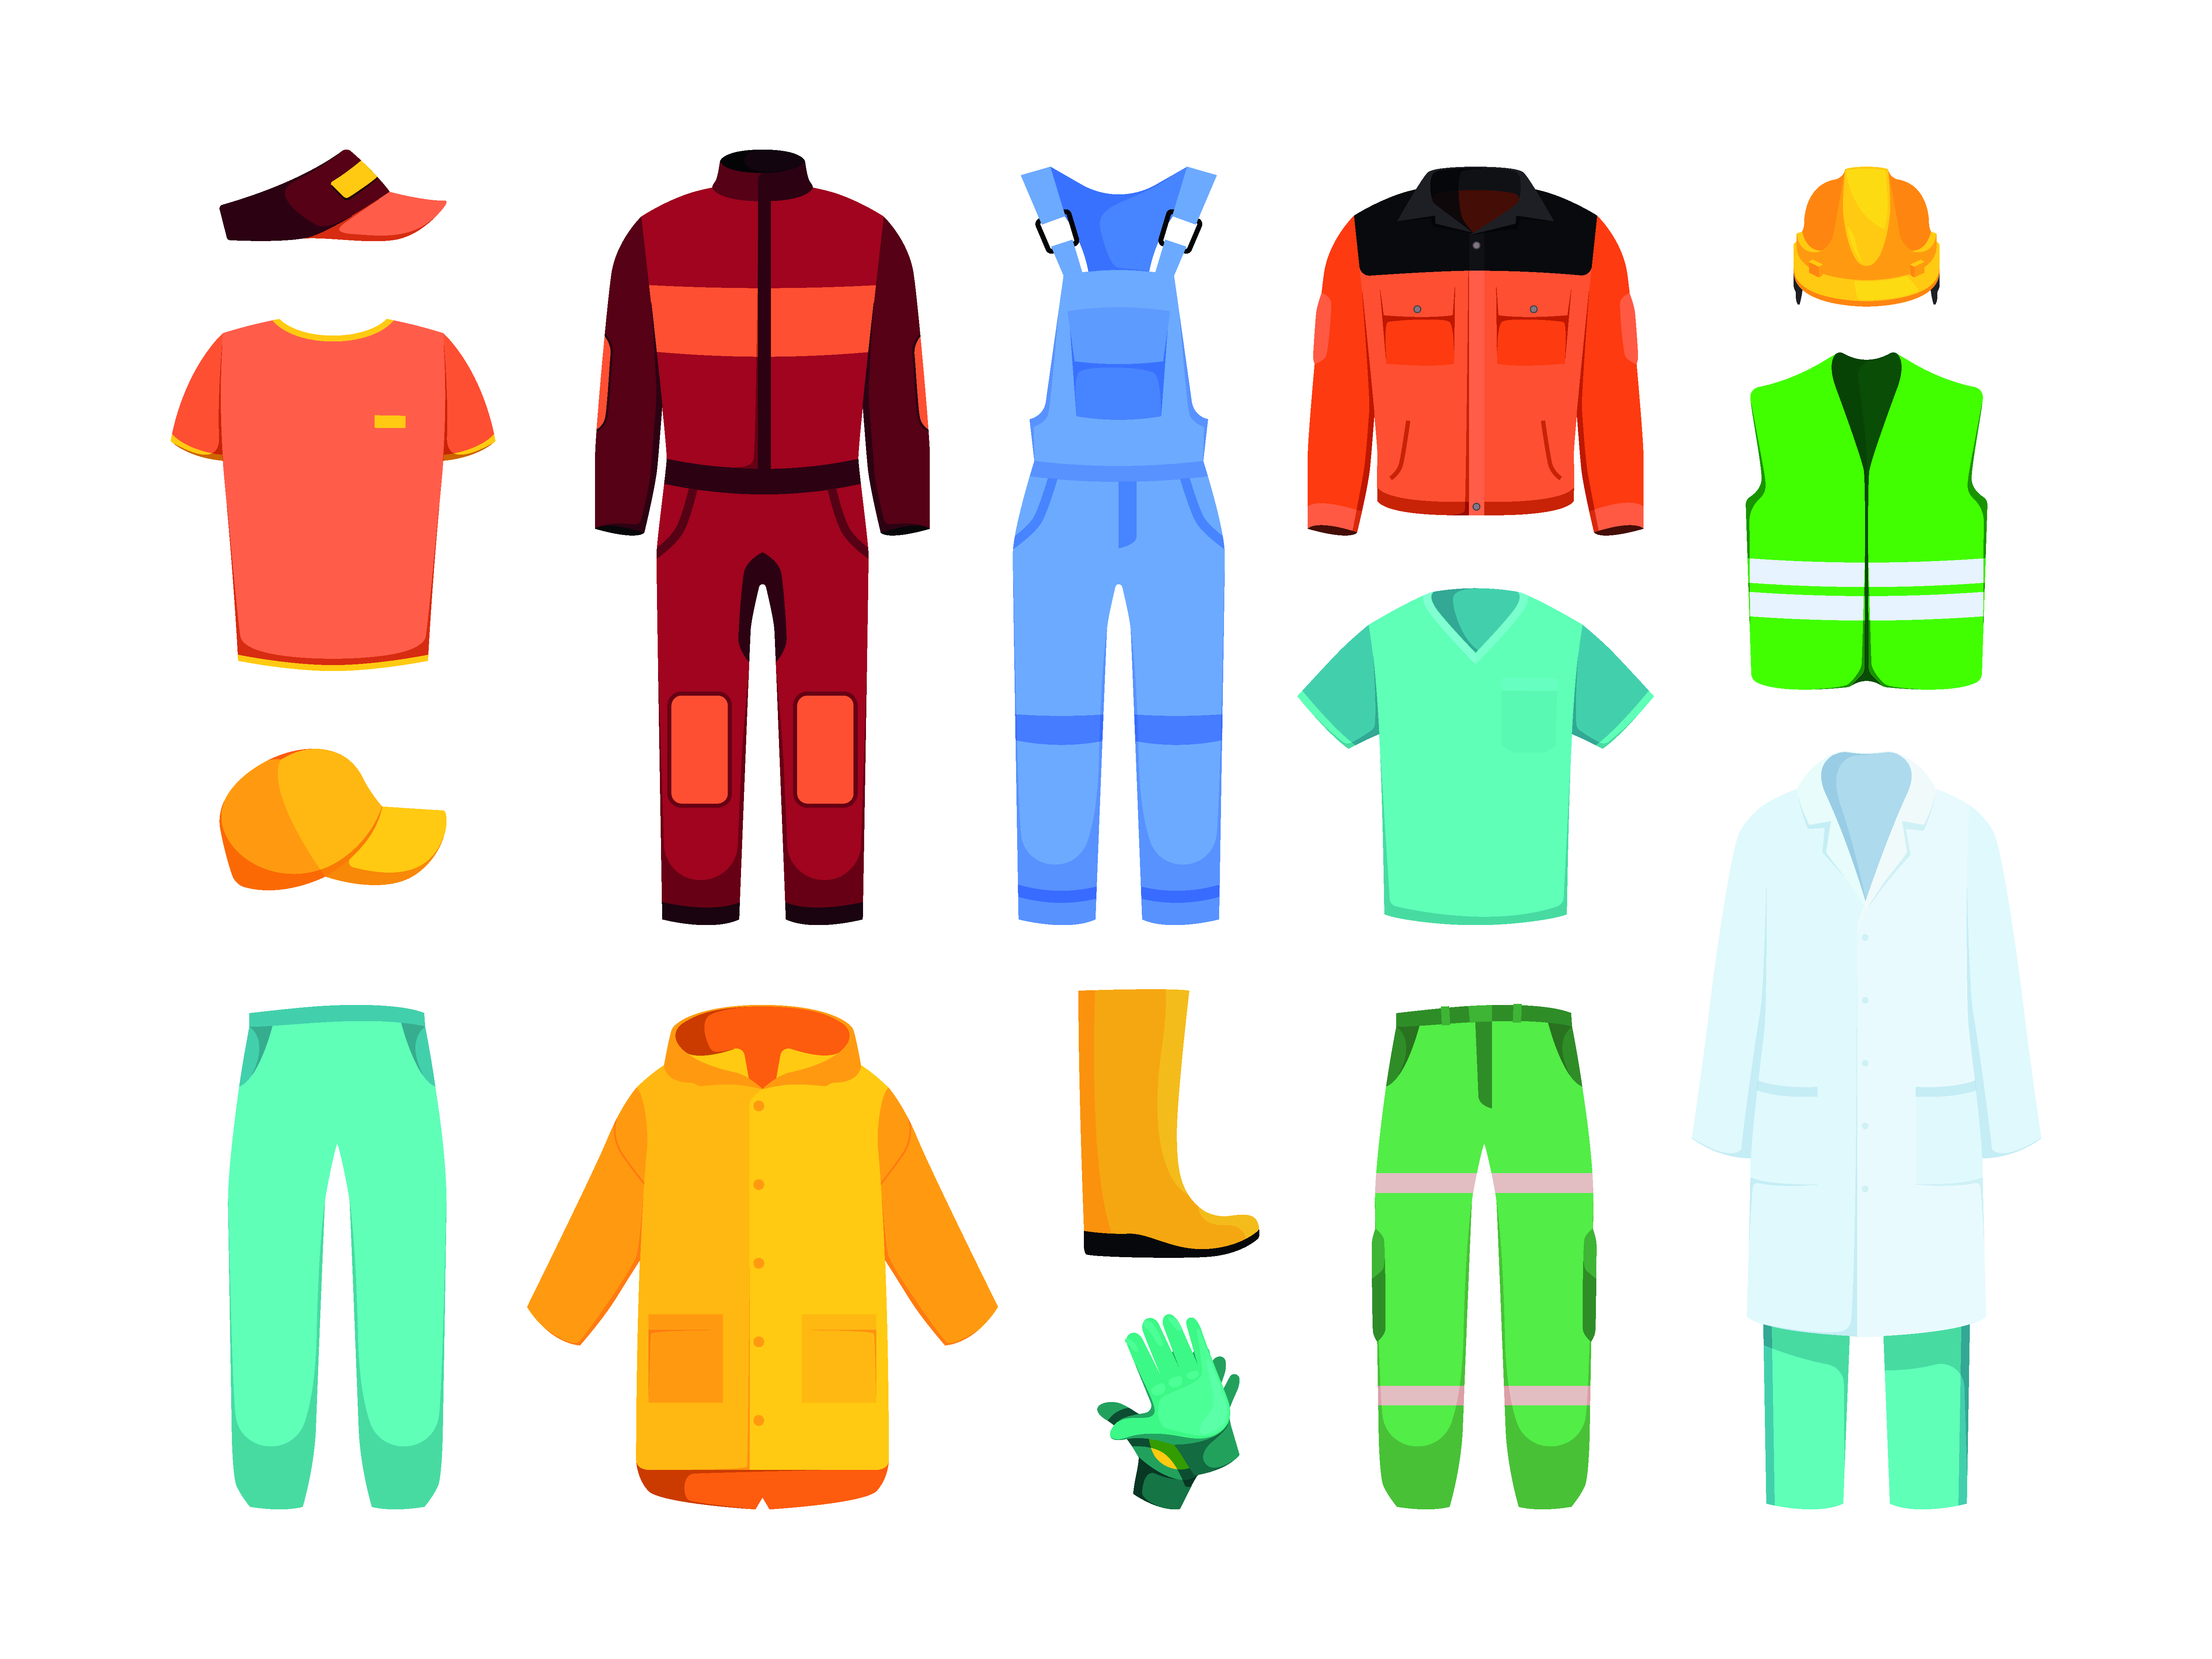 Protective clothing: Why wear it? - Mendip Safety Supplies